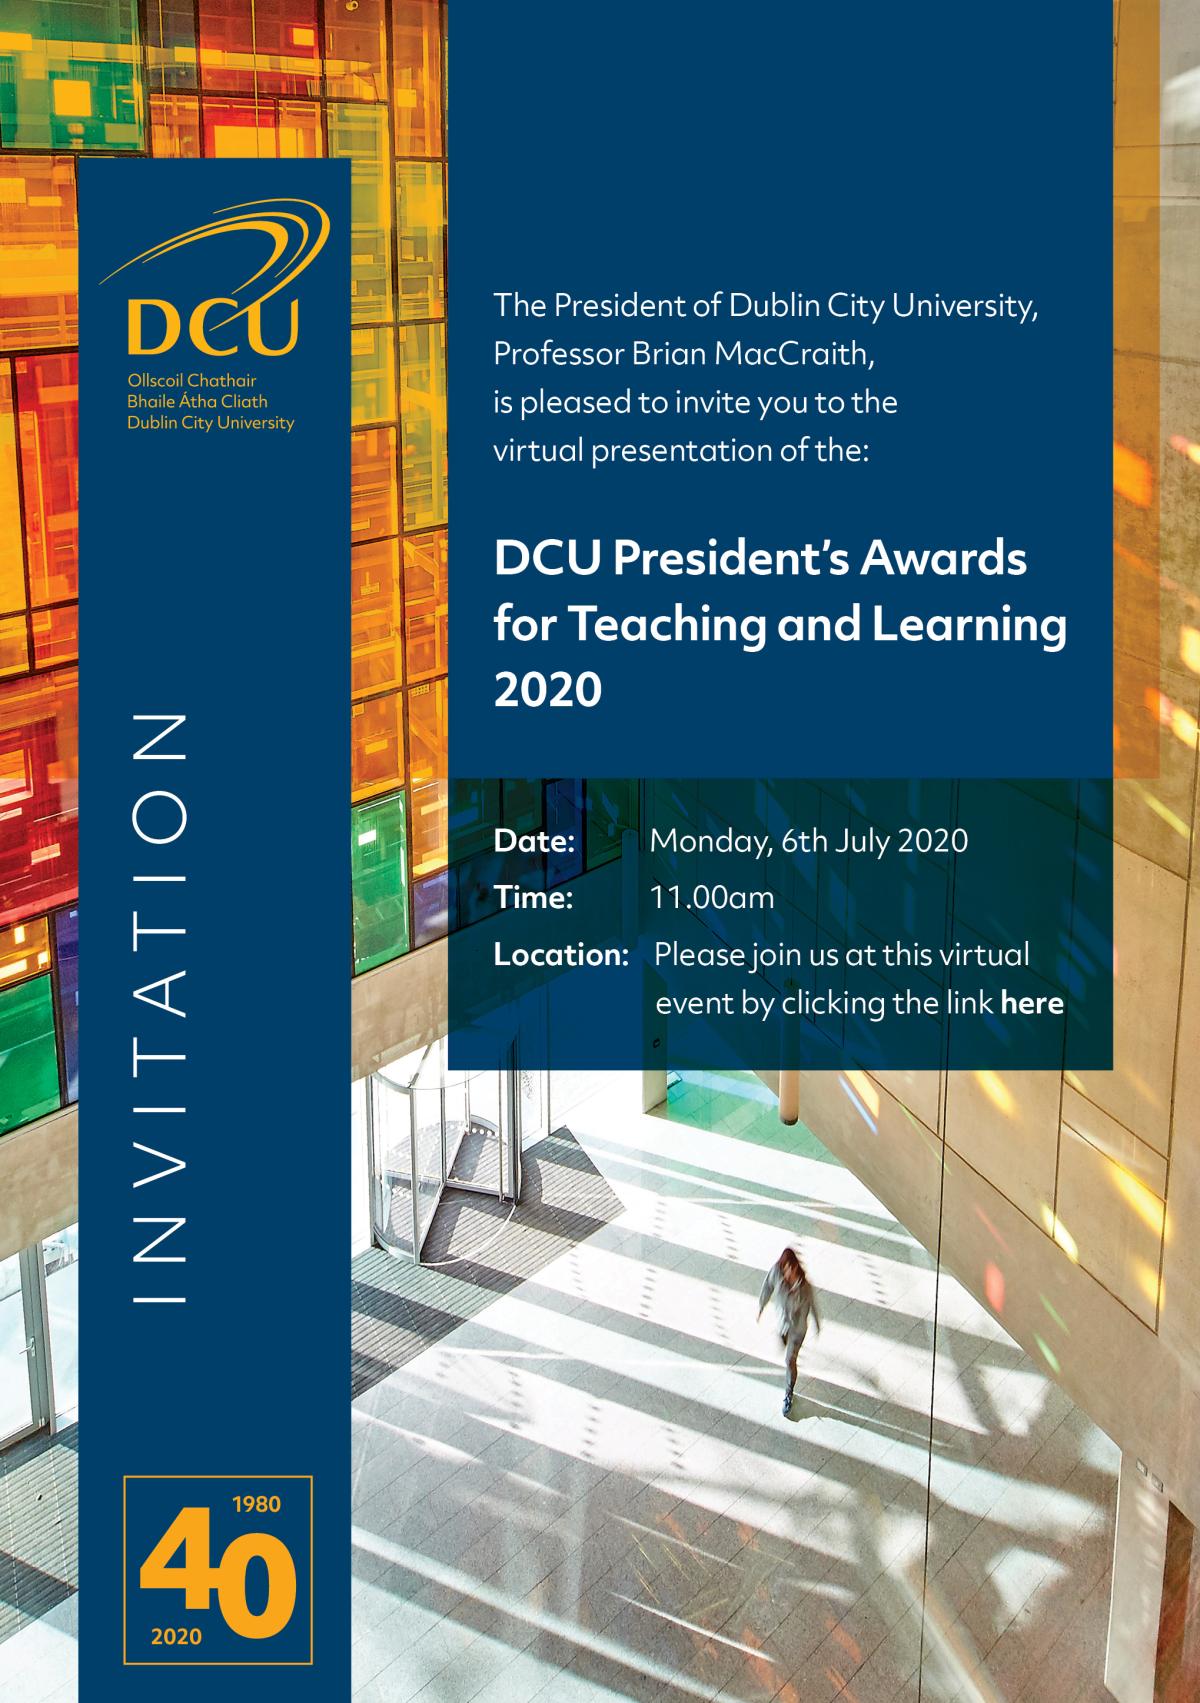 DCU President's Awards for Teaching and Learning 2020